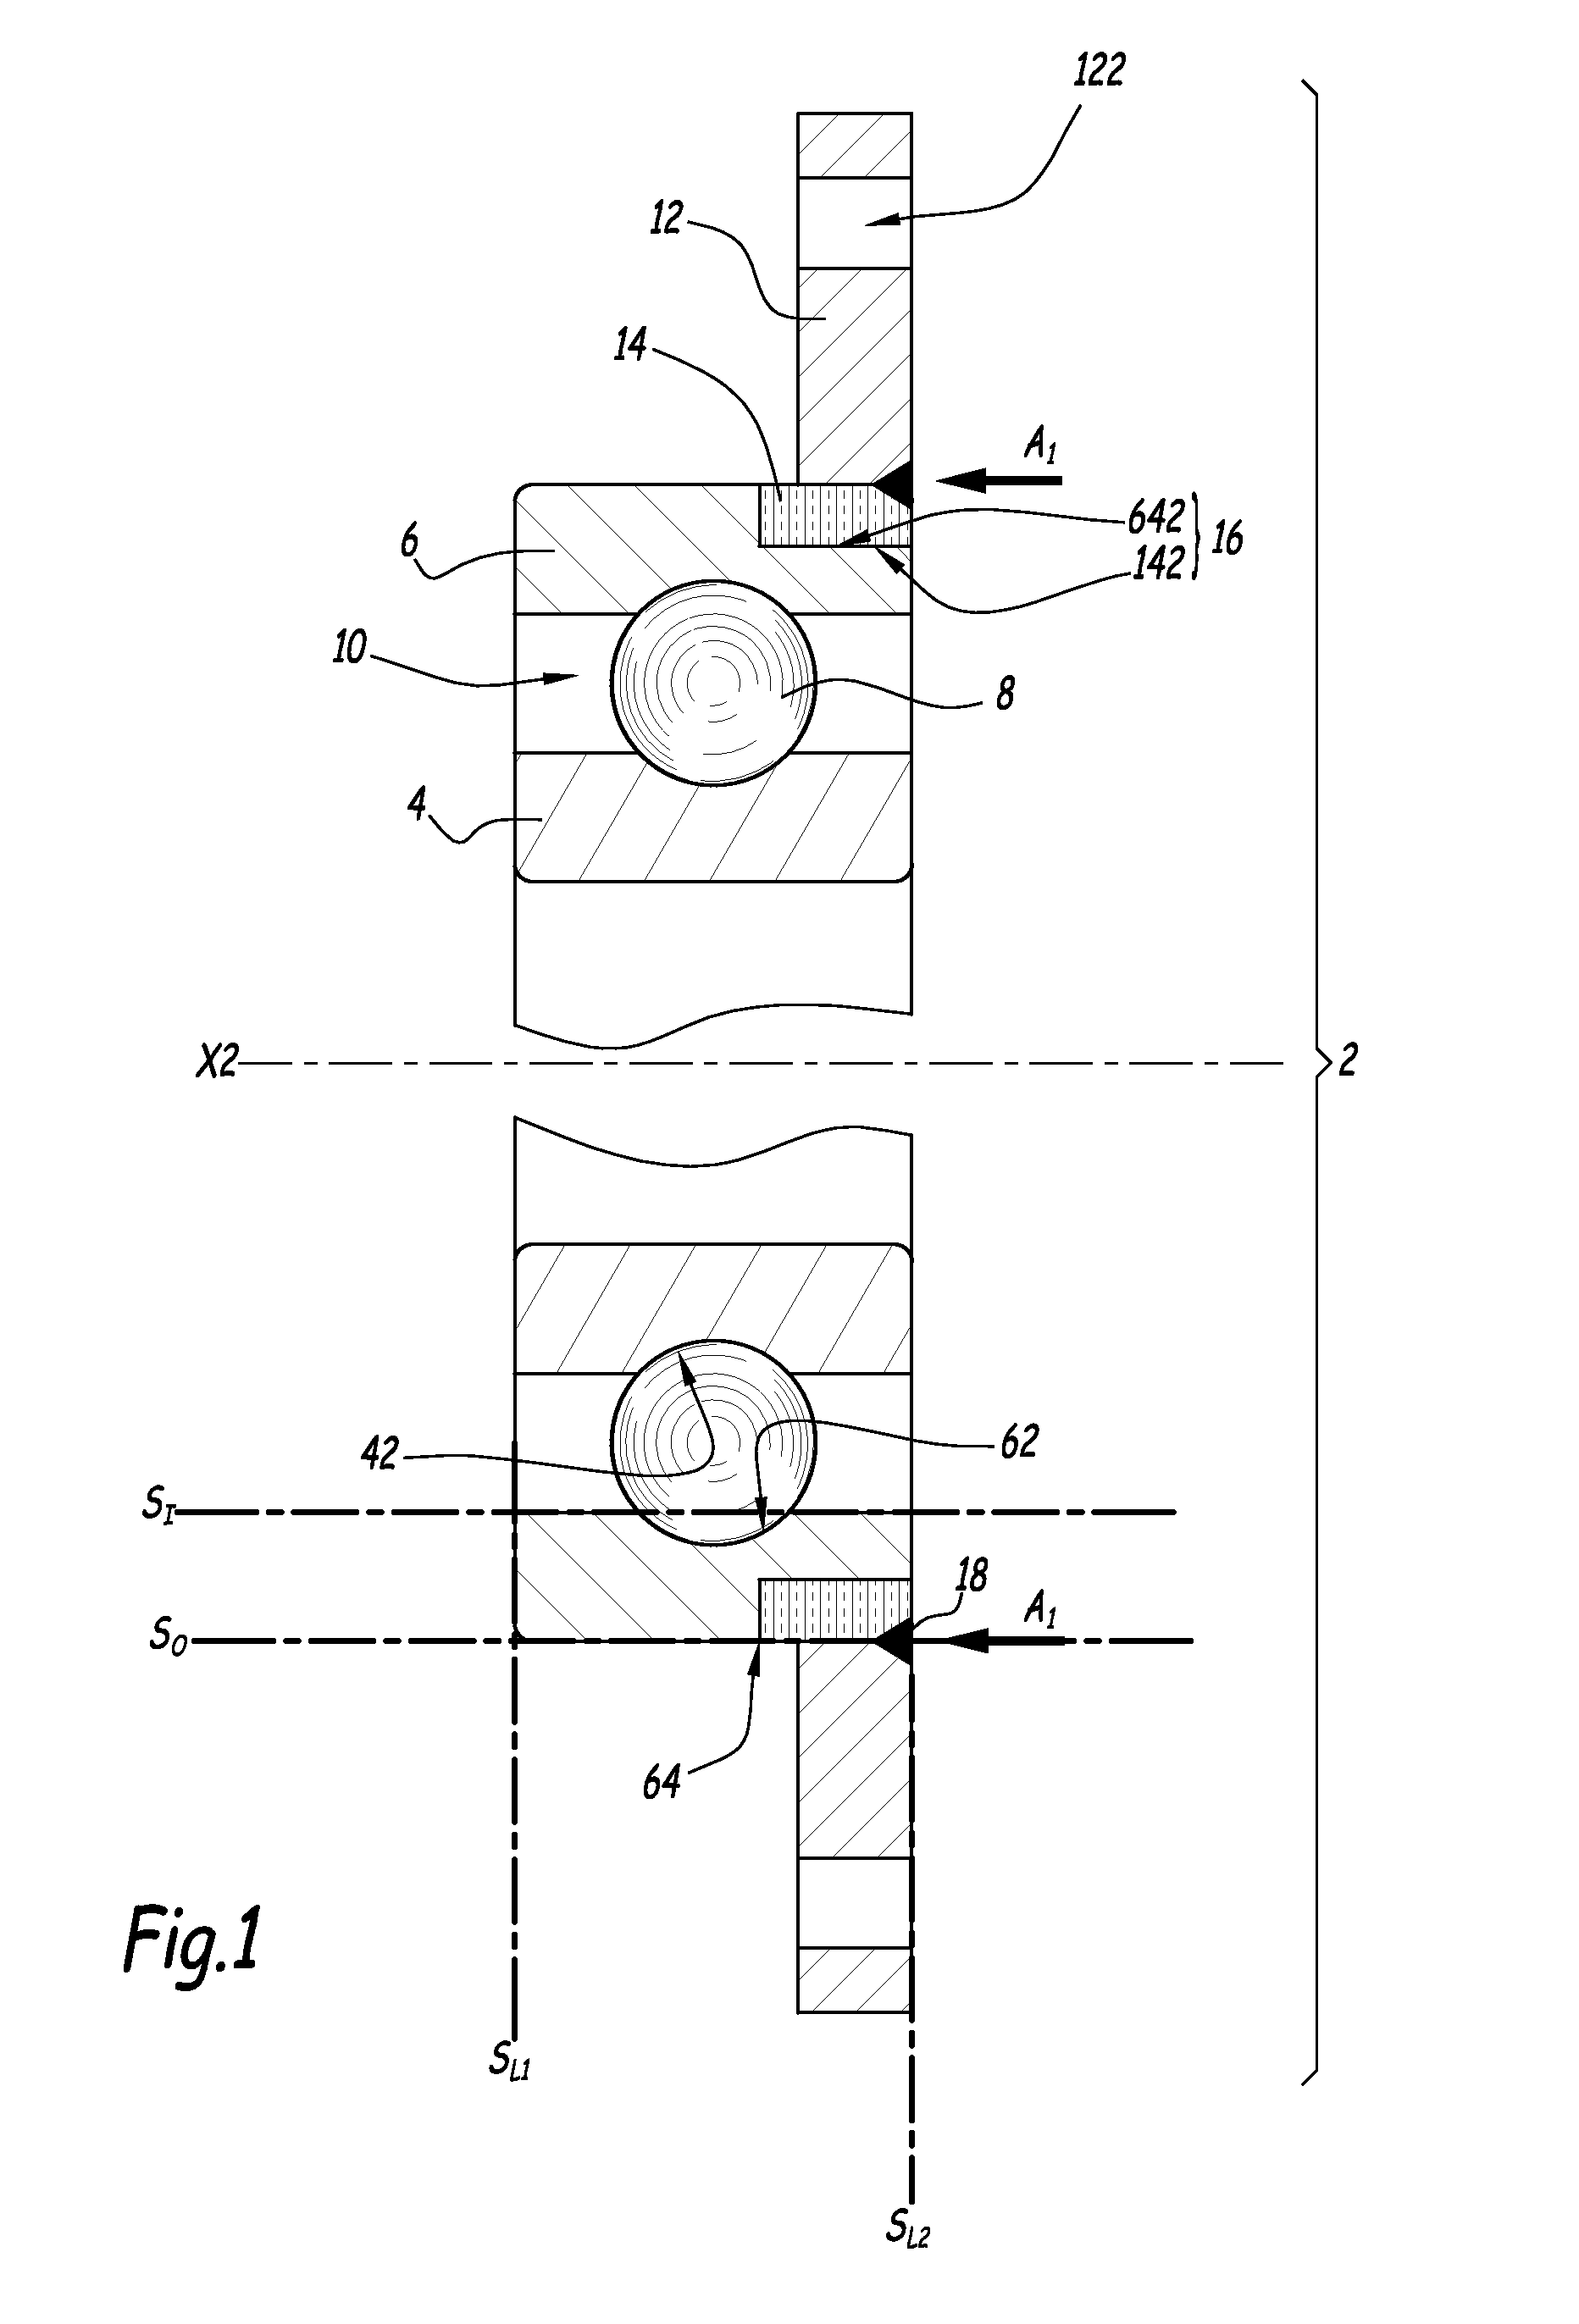 Method for manufacturing a rolling bearing and rolling bearing manufactured according to such a method